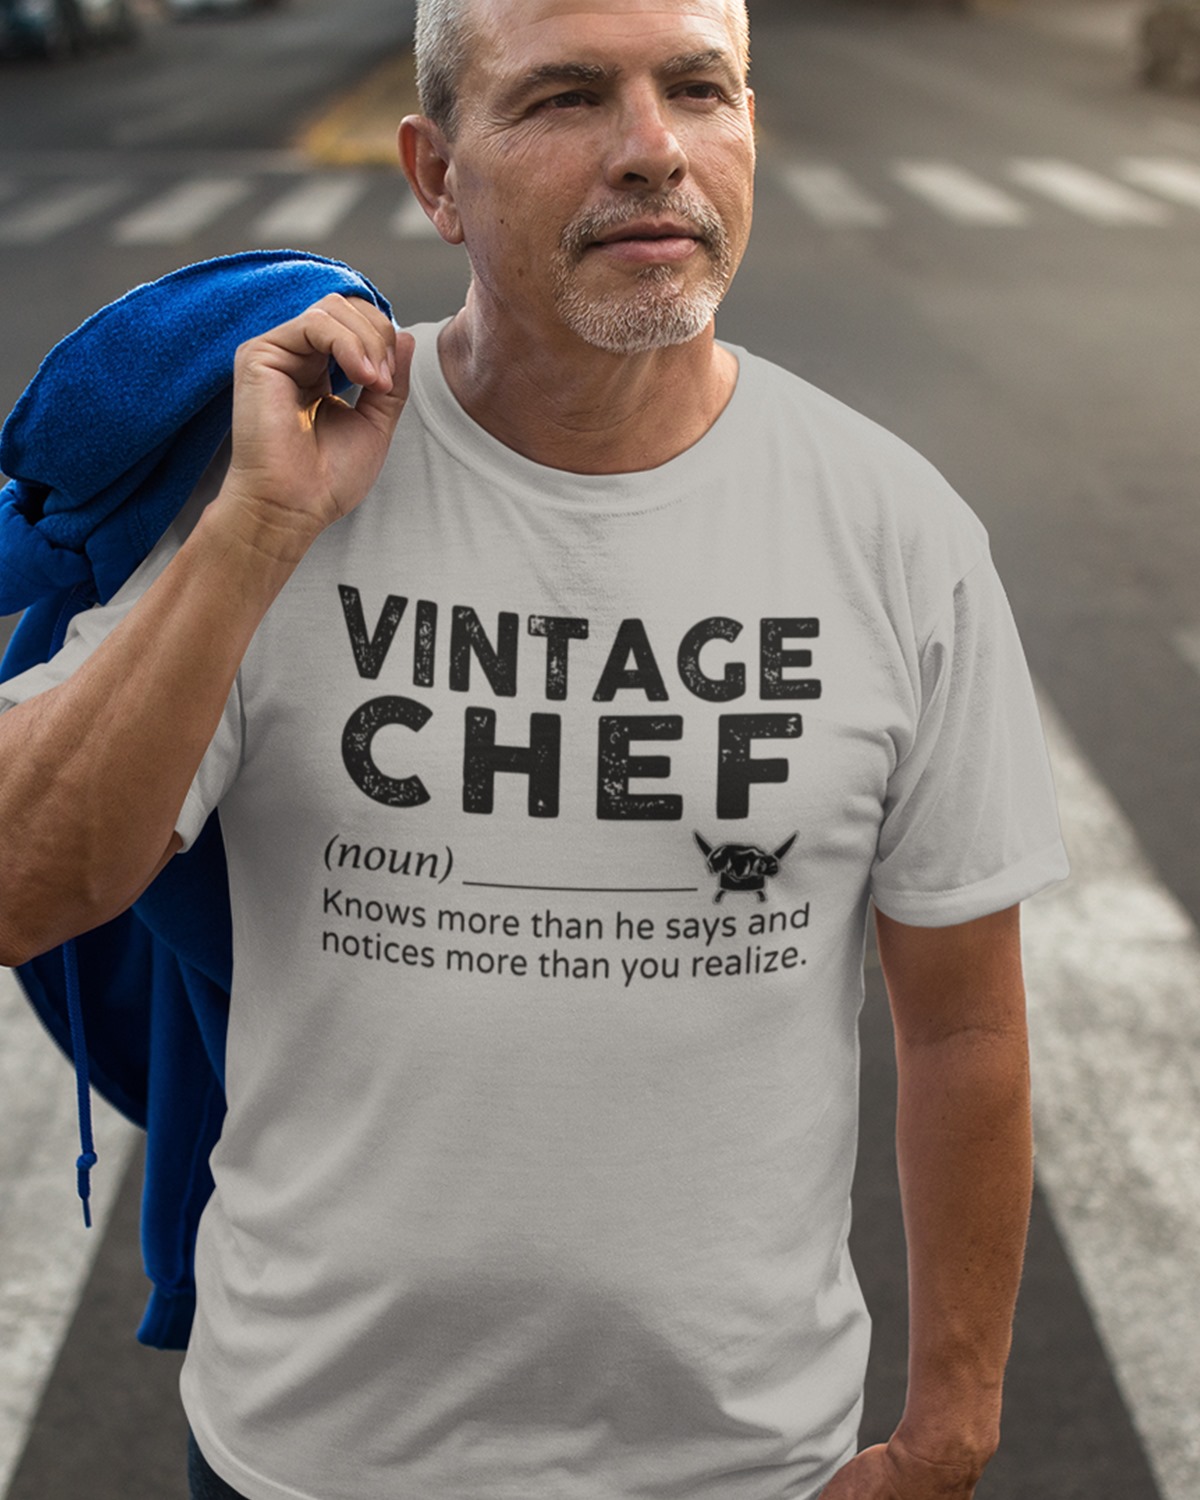 vintage chef. know more than he says and notices more than you realize